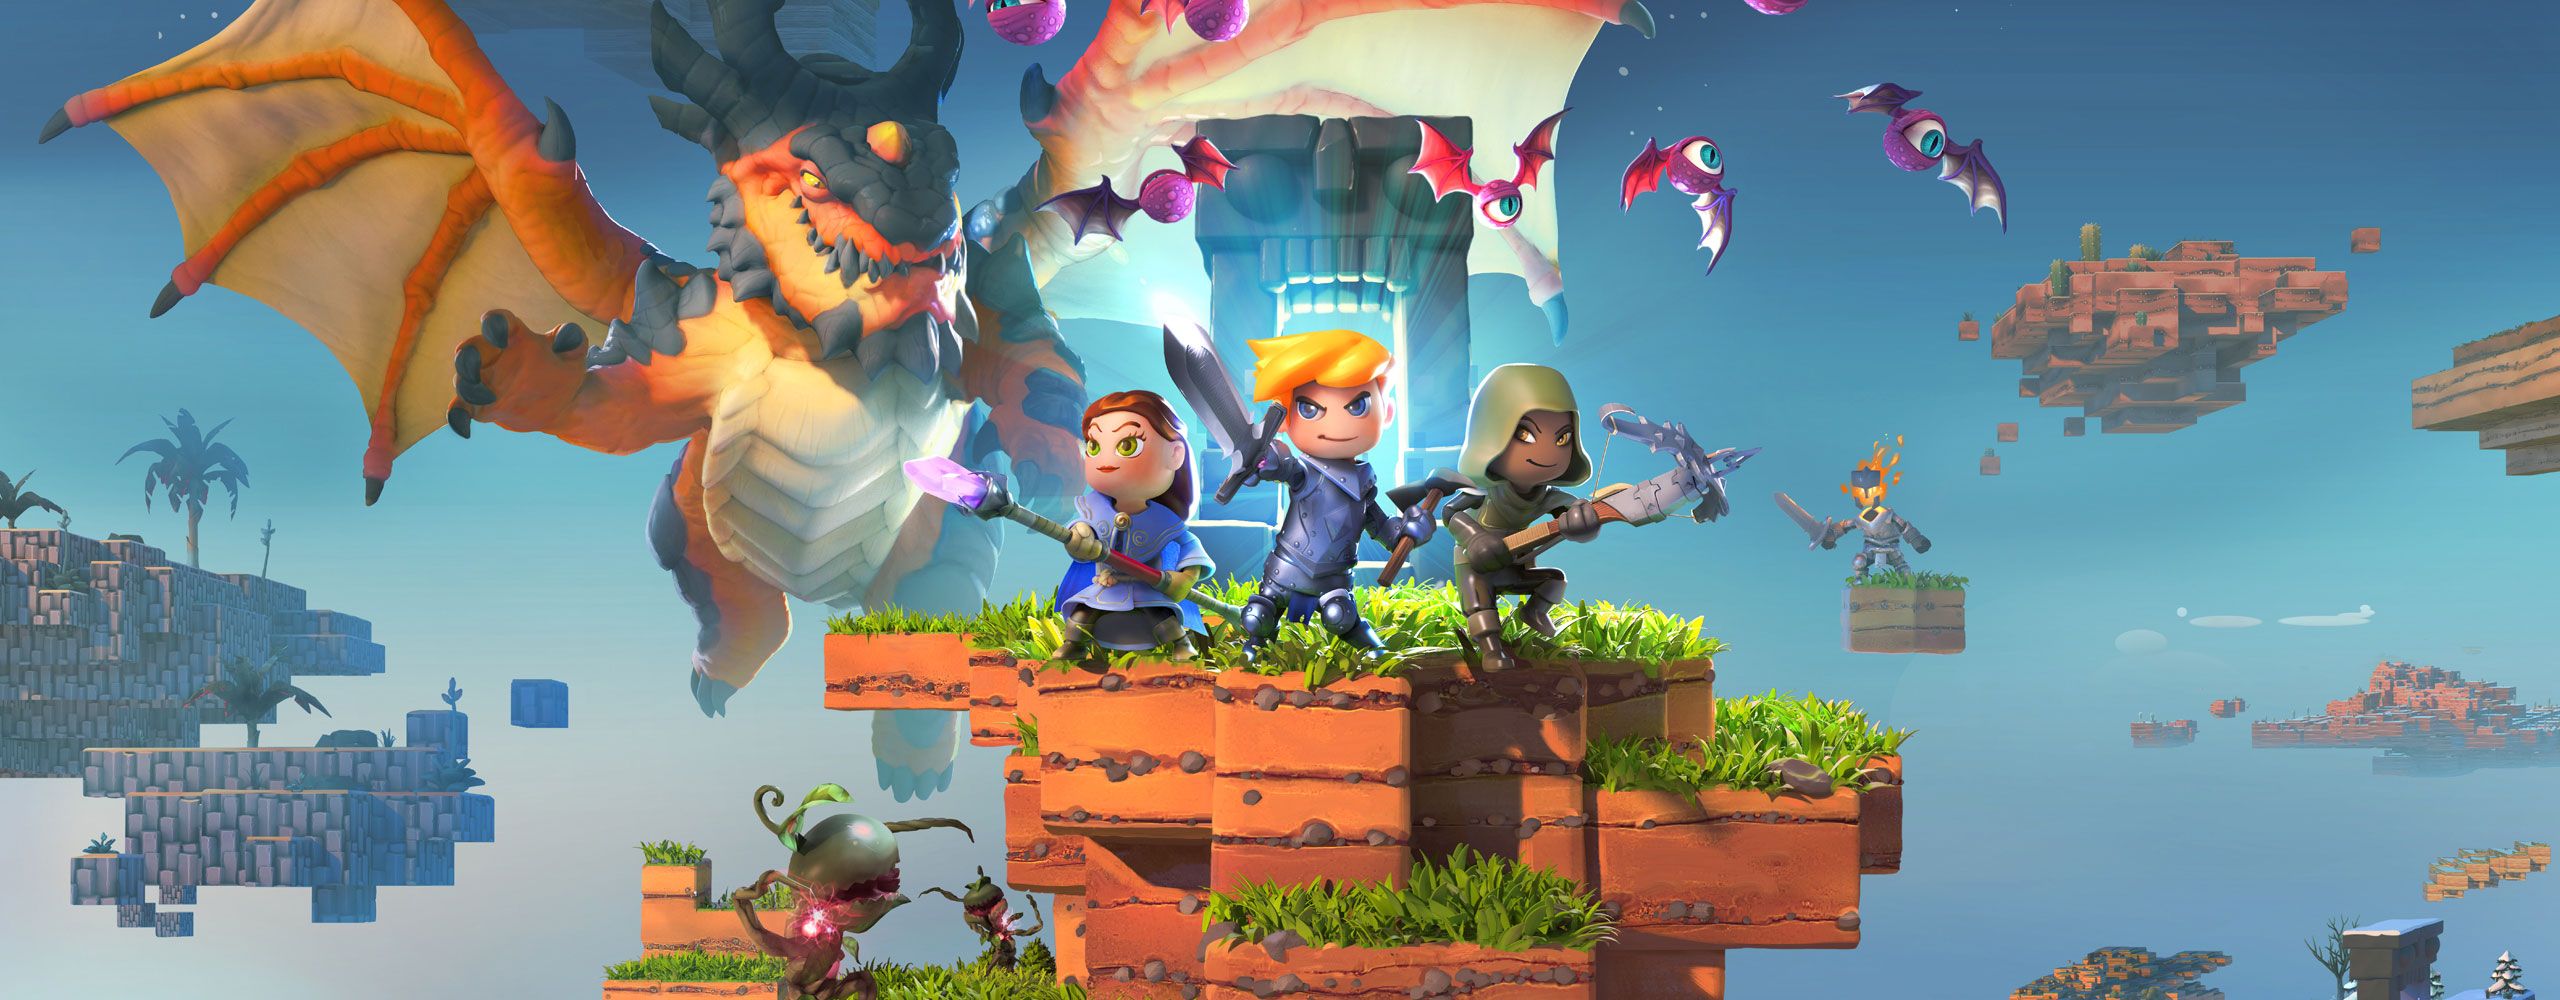 Portal Knights 1.2 Update Drops Today; Introduces Tons of New